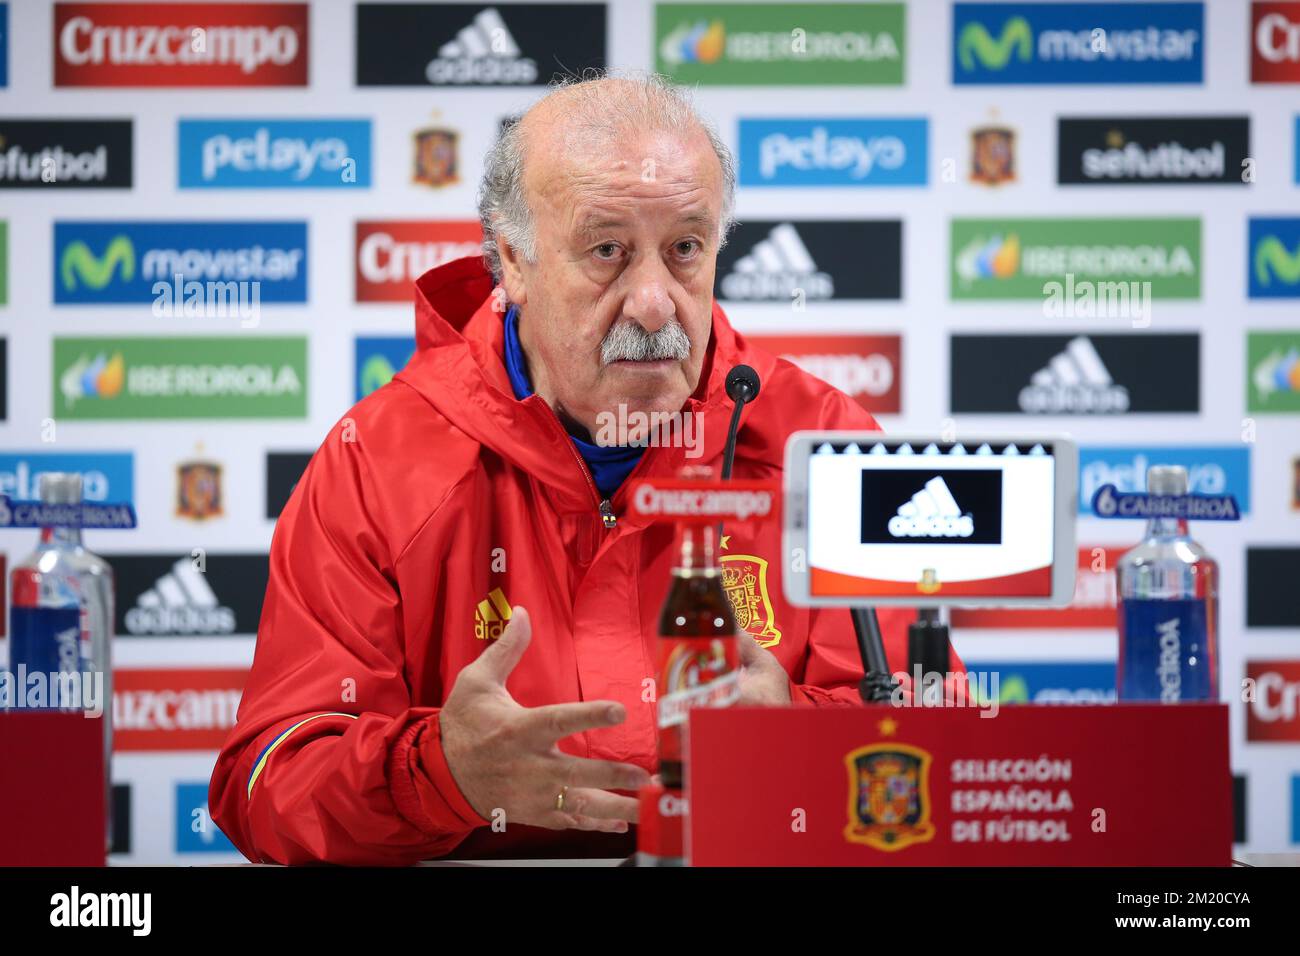 20151116 - BRUSSELS, BELGIUM: Spain's head coach Vicente del Bosque pictured during a press conference of the Spanish national soccer team, Monday 16 November 2015, in Brussels. Tomorrow Spain is playing the Red Devils, the Belgian national soccer team, in preparation of the Euro2016 European Championships. BELGA PHOTO  Stock Photo